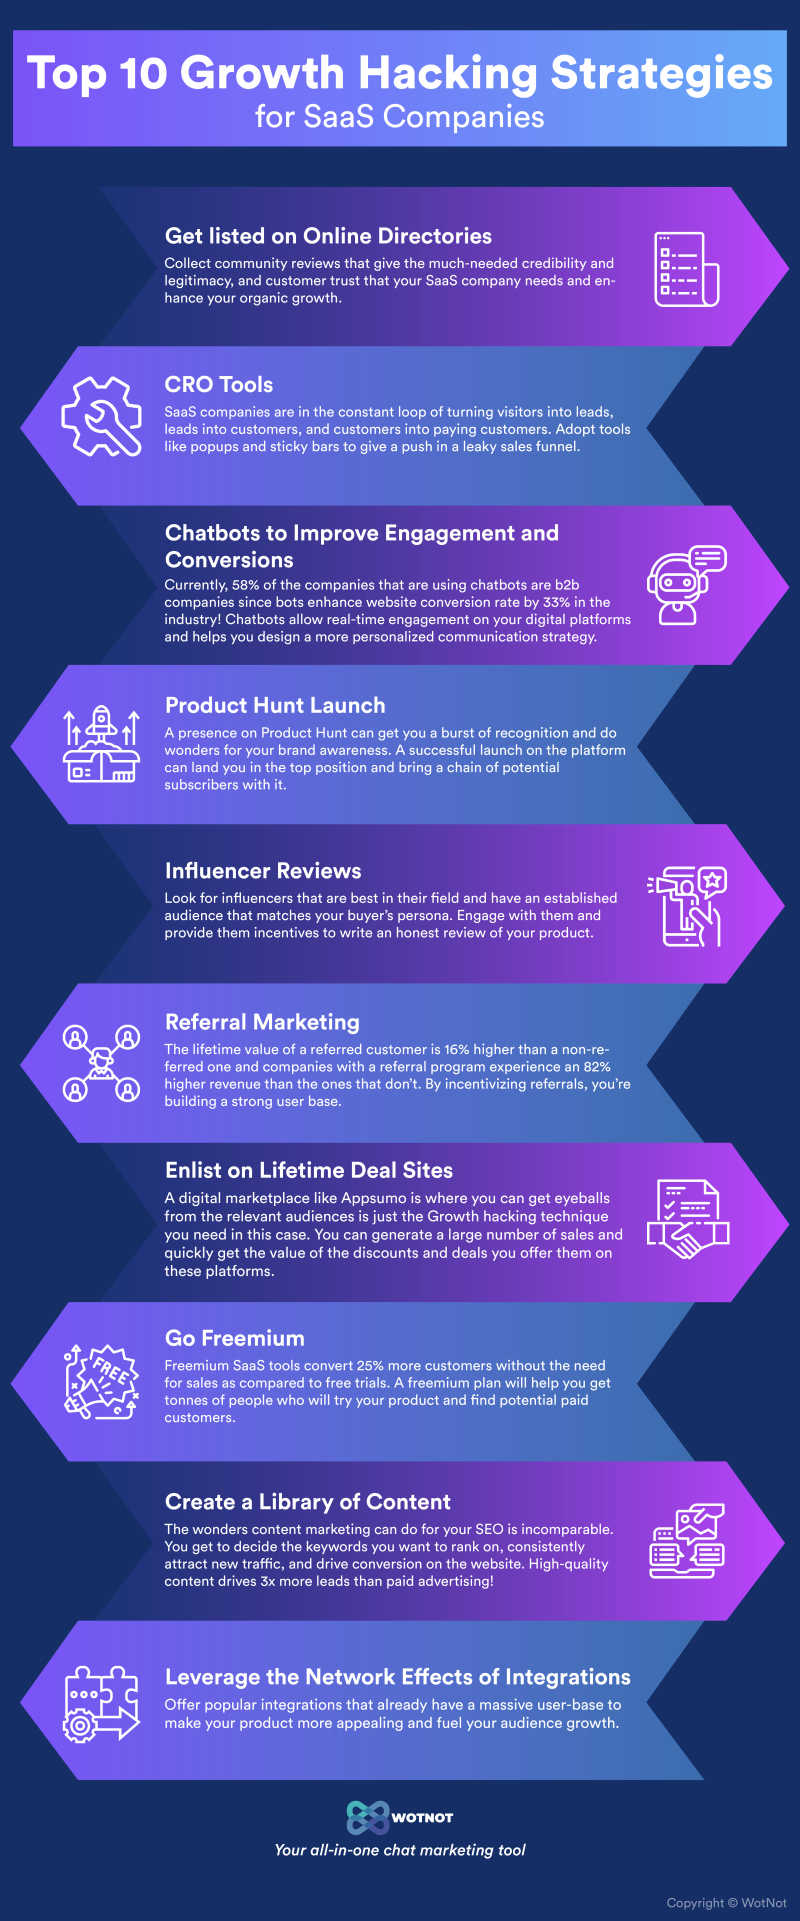 Top 10 Growth Hacking Strategies for SaaS Companies - Infographic